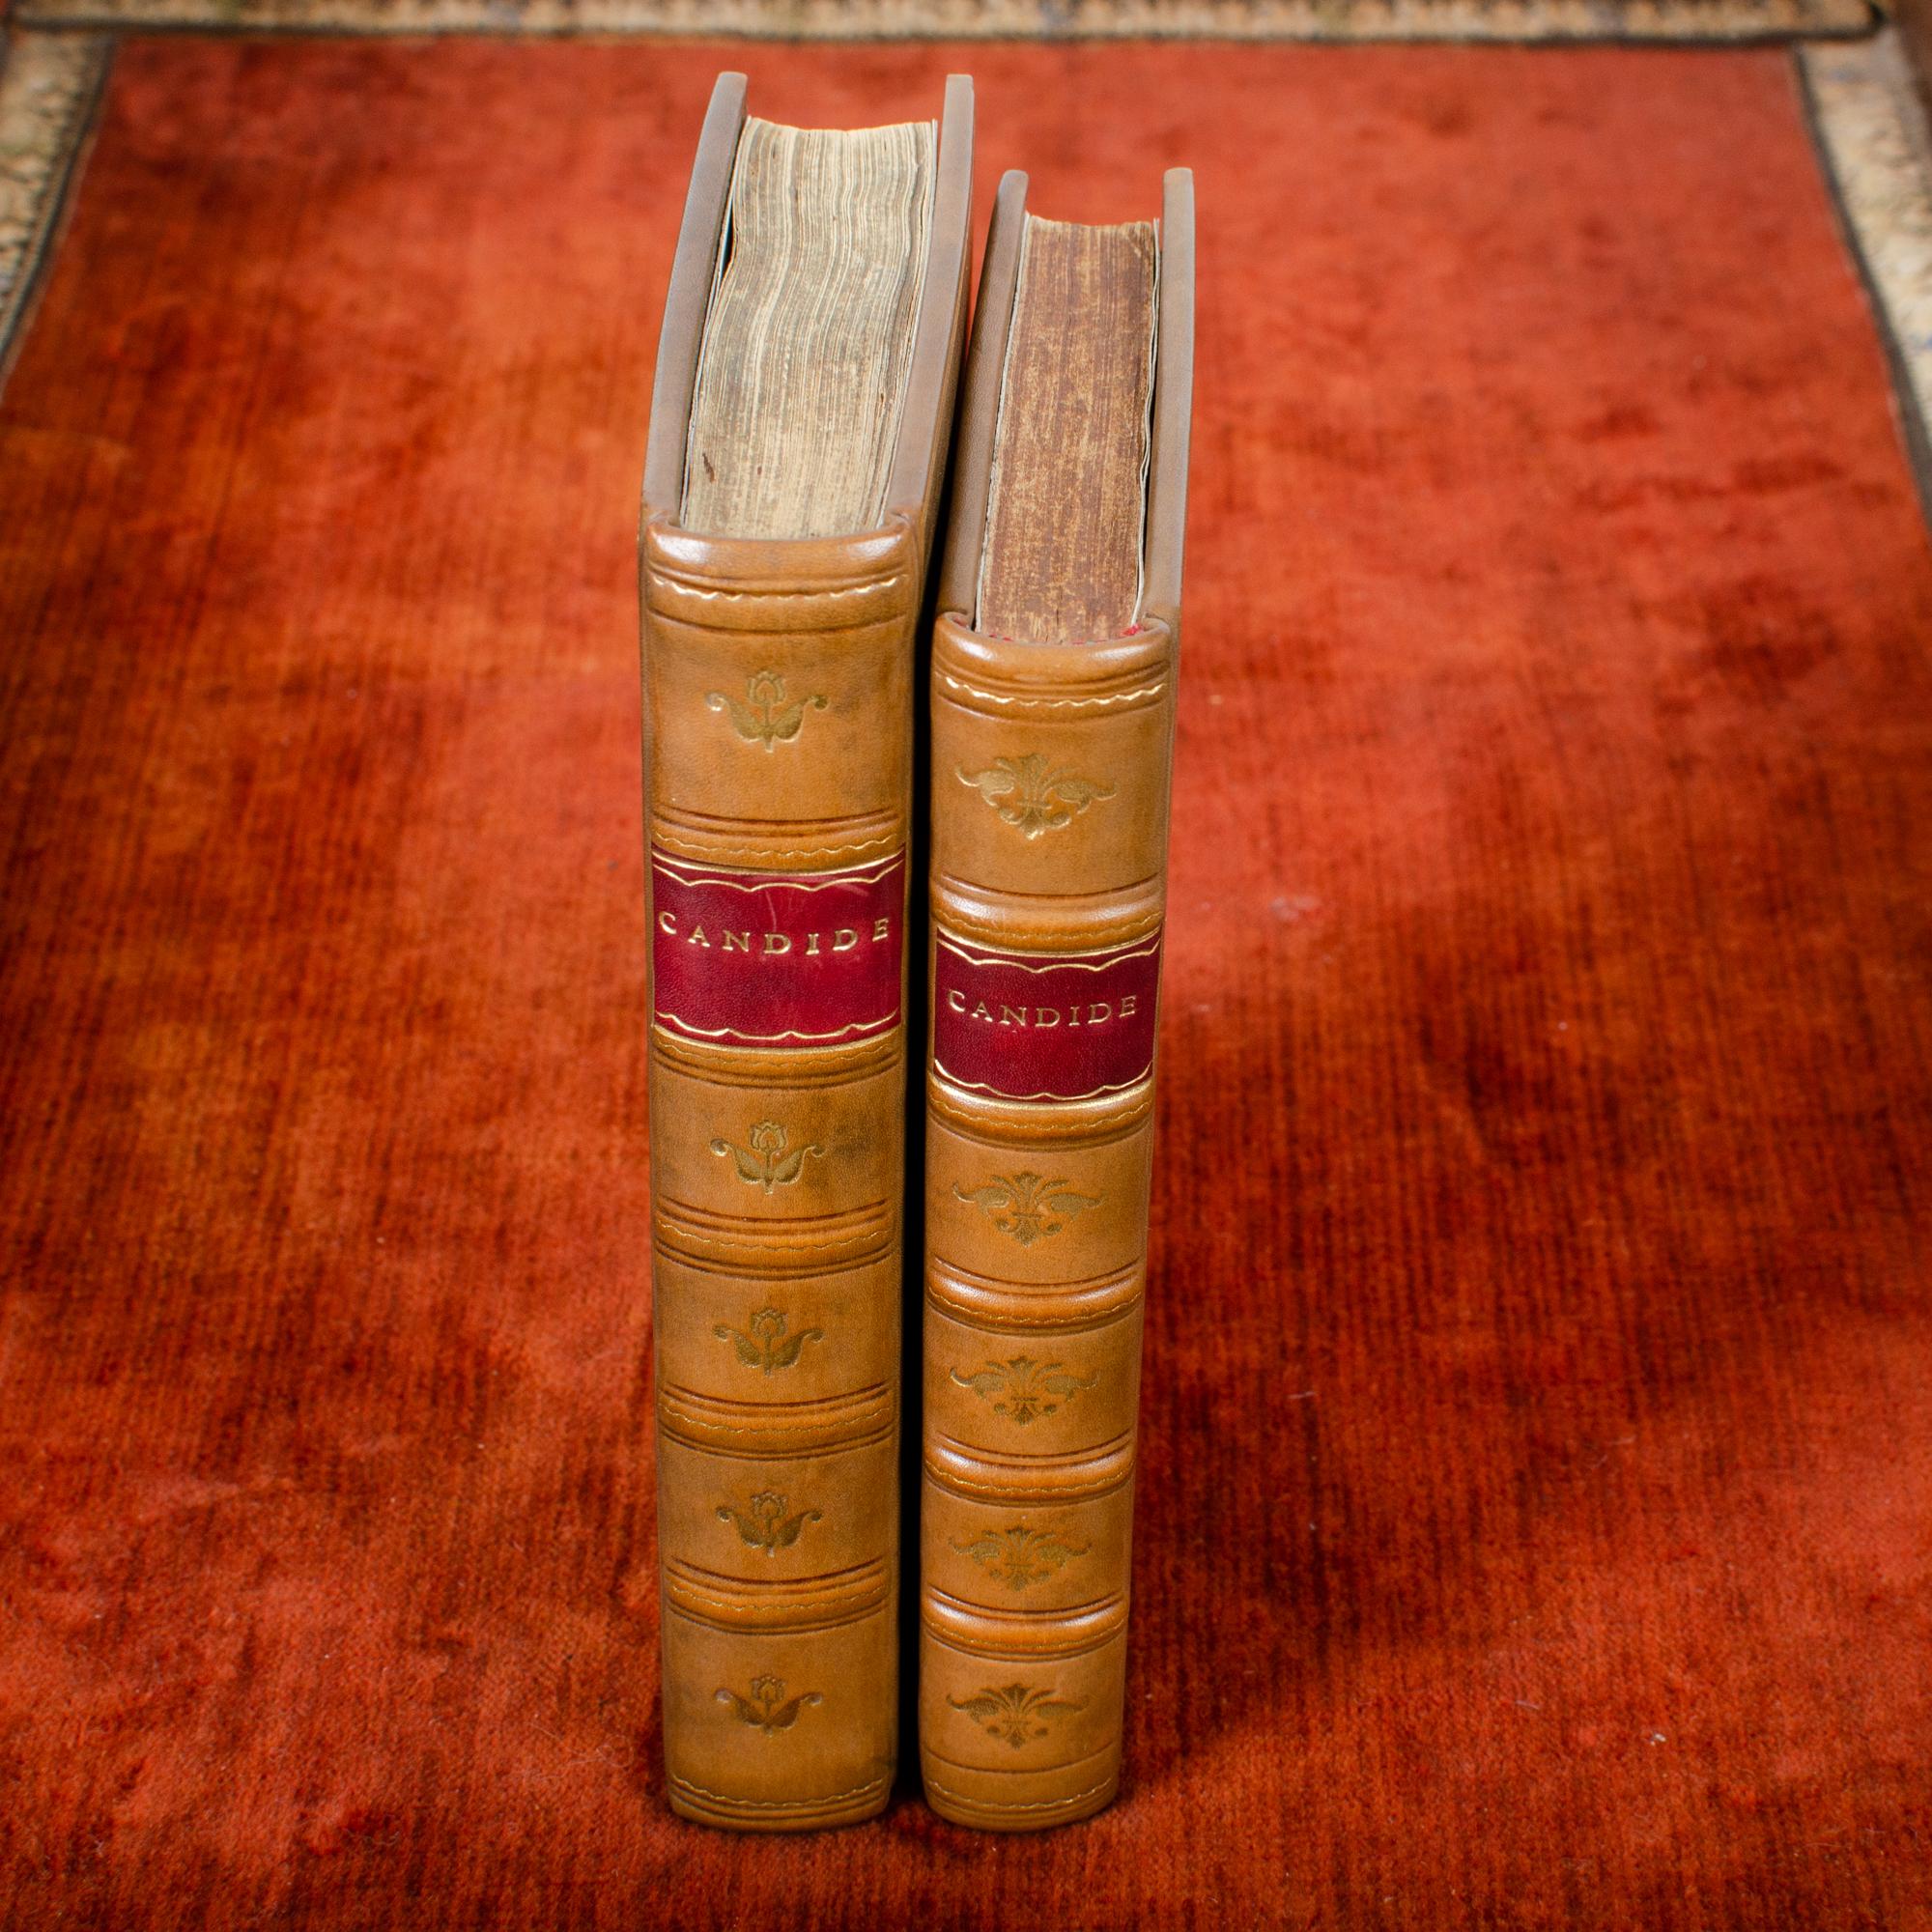 Voltaire's Candide True First Edition & First London Edition In Good Condition For Sale In Savannah, GA